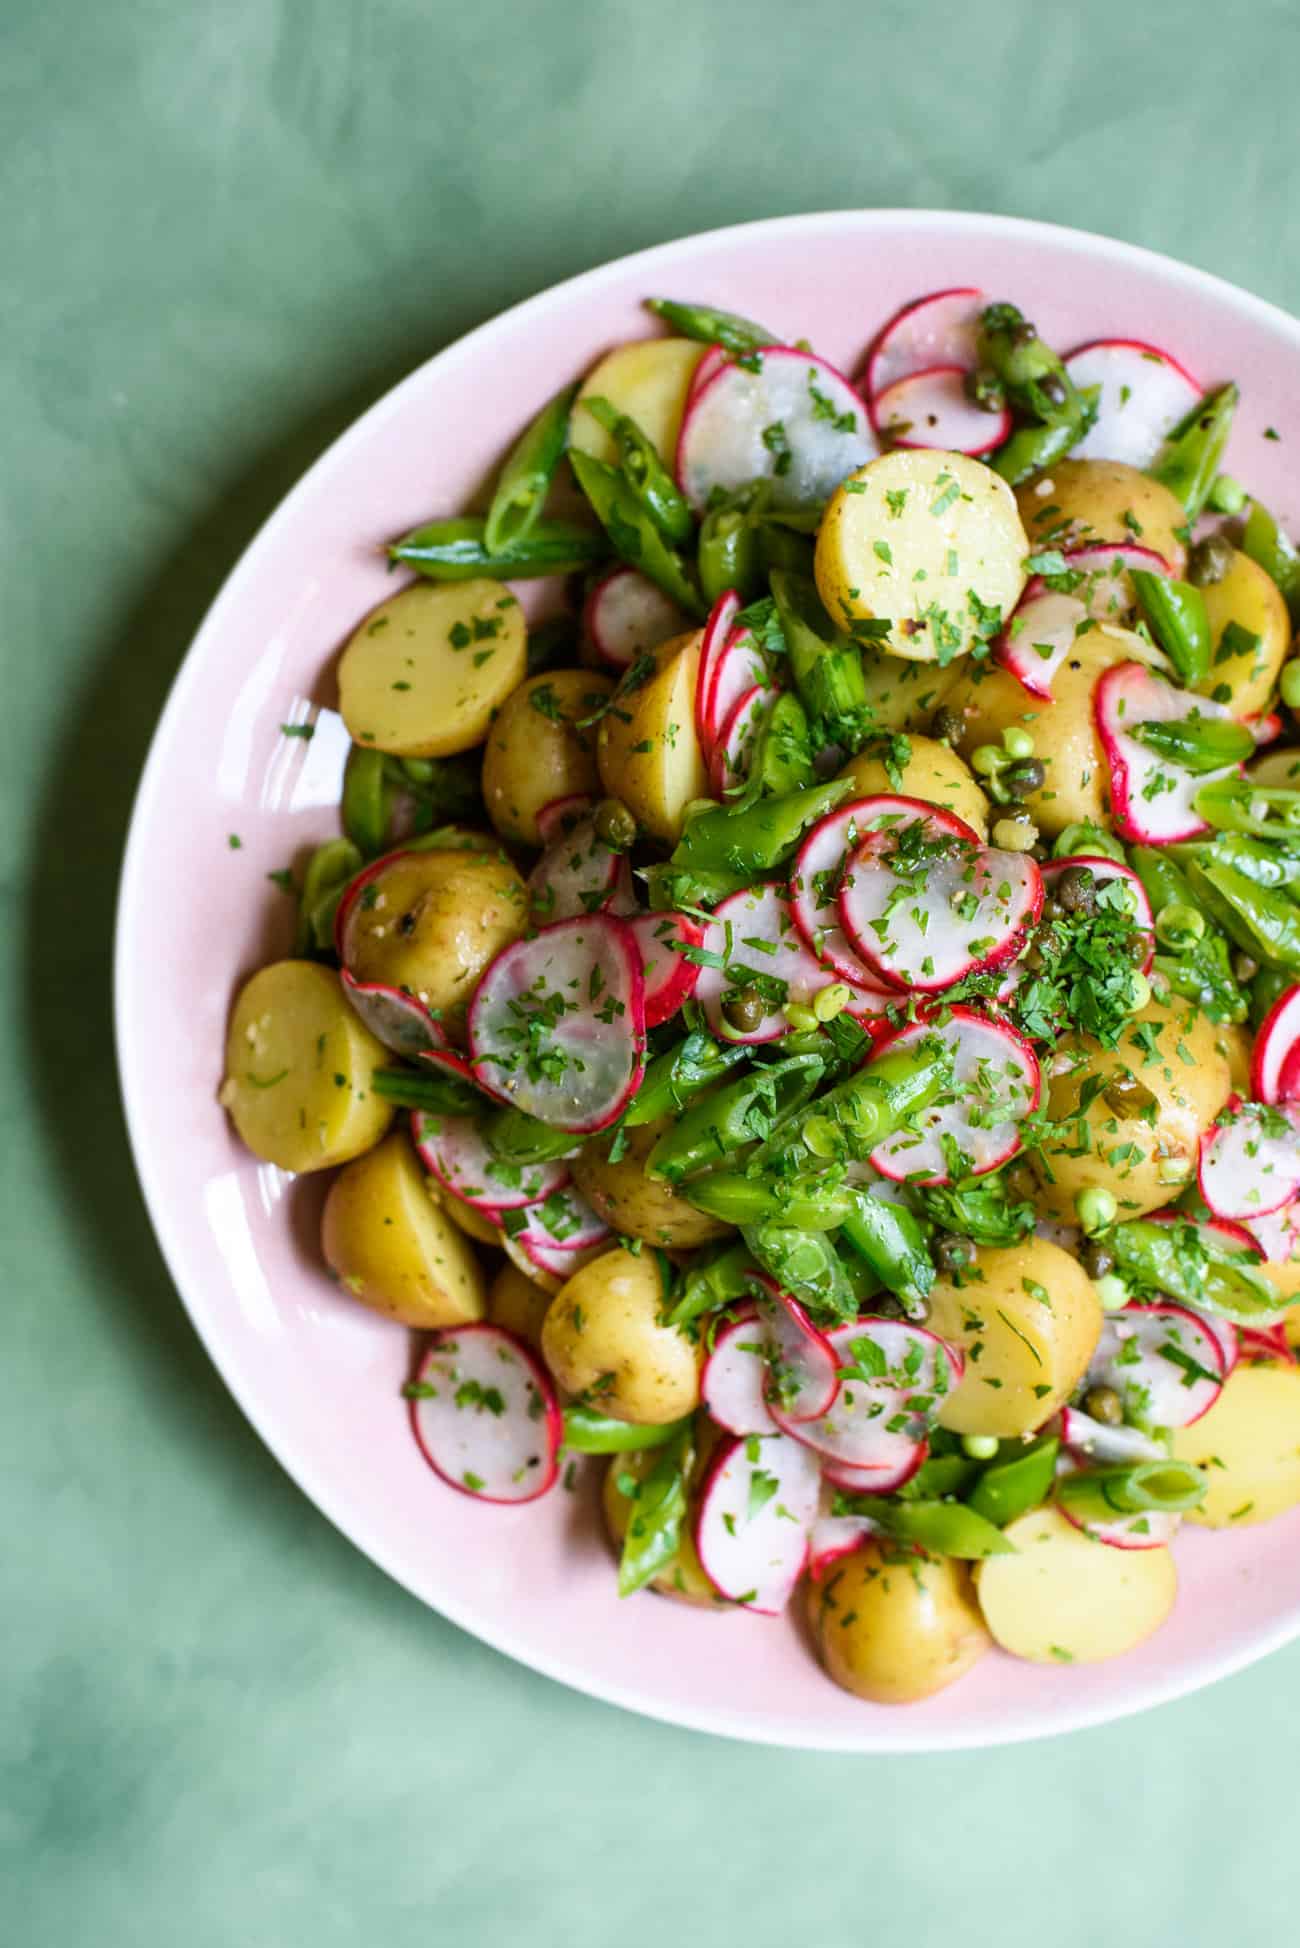 Mayo-less potato salad with radishes and sugar snap peas on a pink platter on a green table